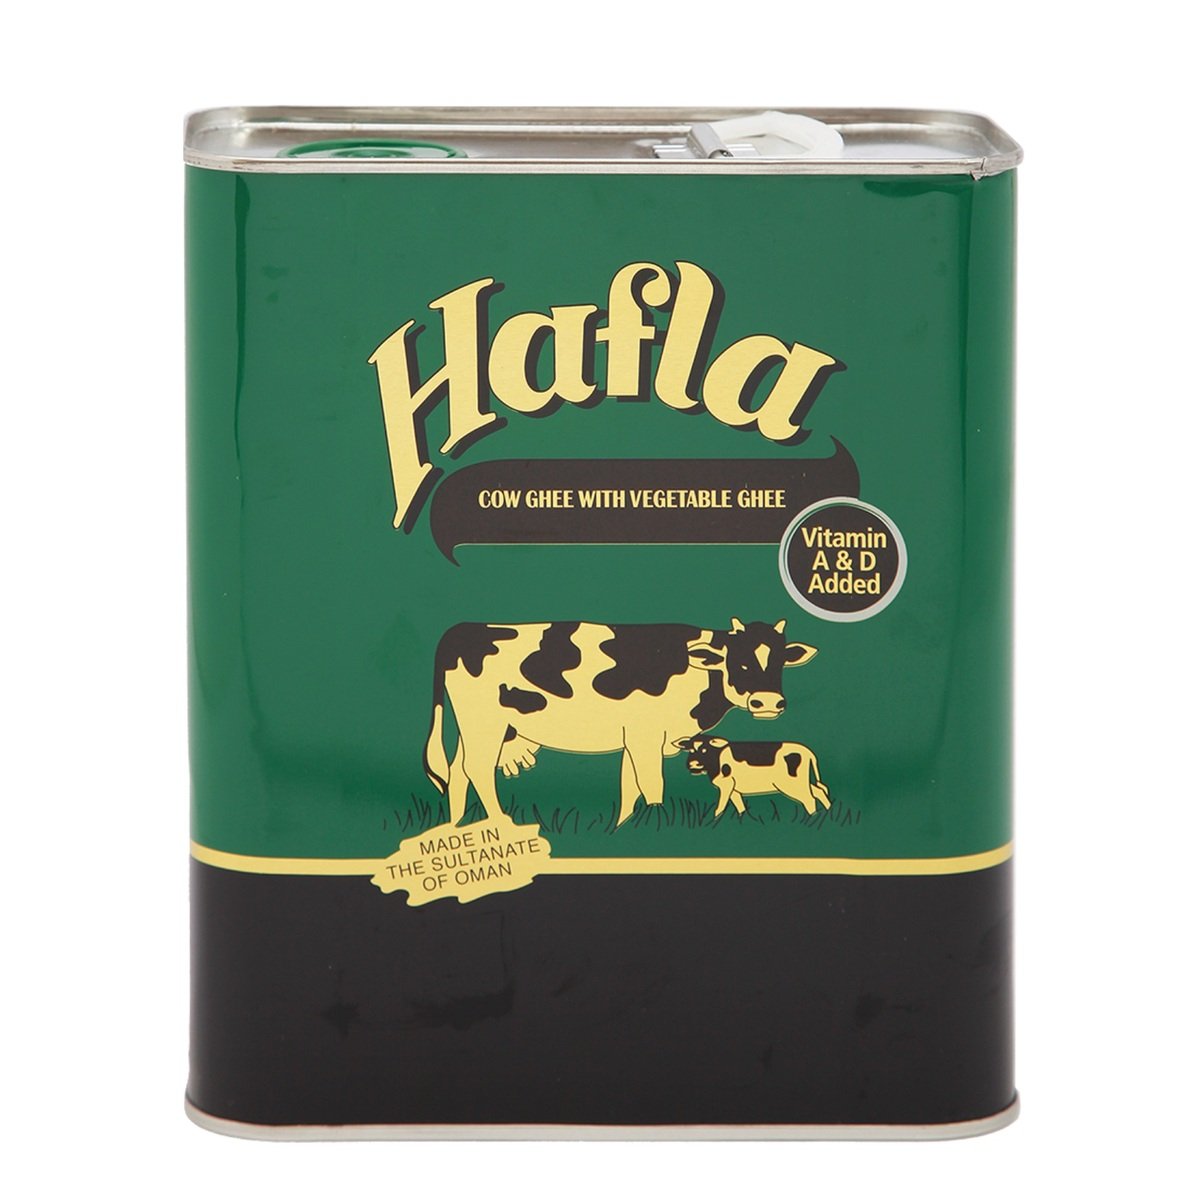 Hafla Cow Ghee With Vegetable Ghee 2 Litres